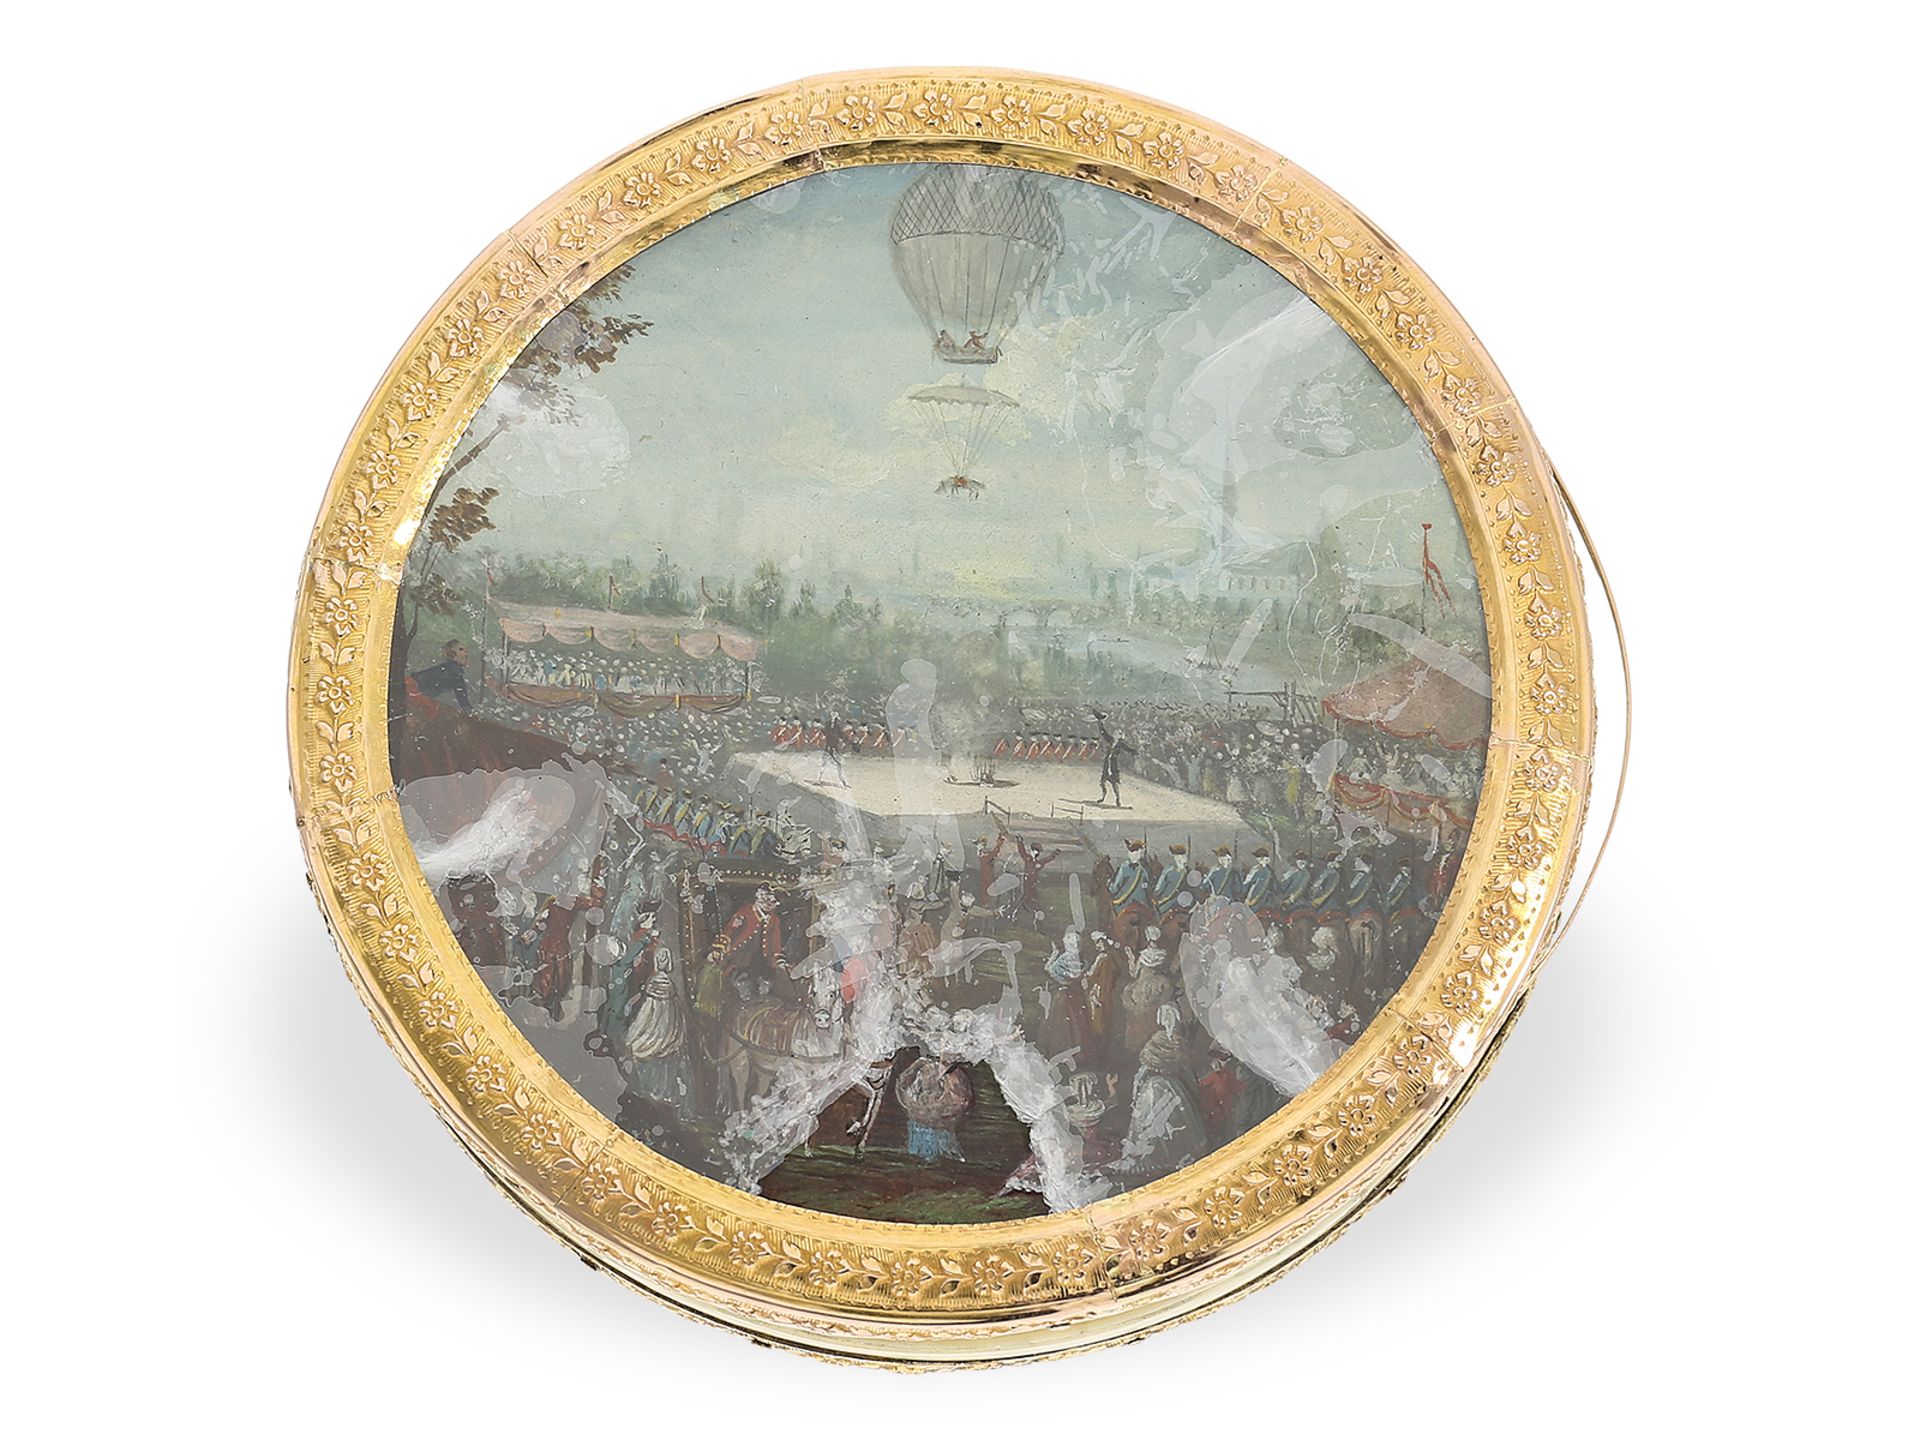 Unique antique snuff box, gold/ivory/tortoiseshell, painting "Circus Spectacle with Rise of a Balloo - Image 3 of 5